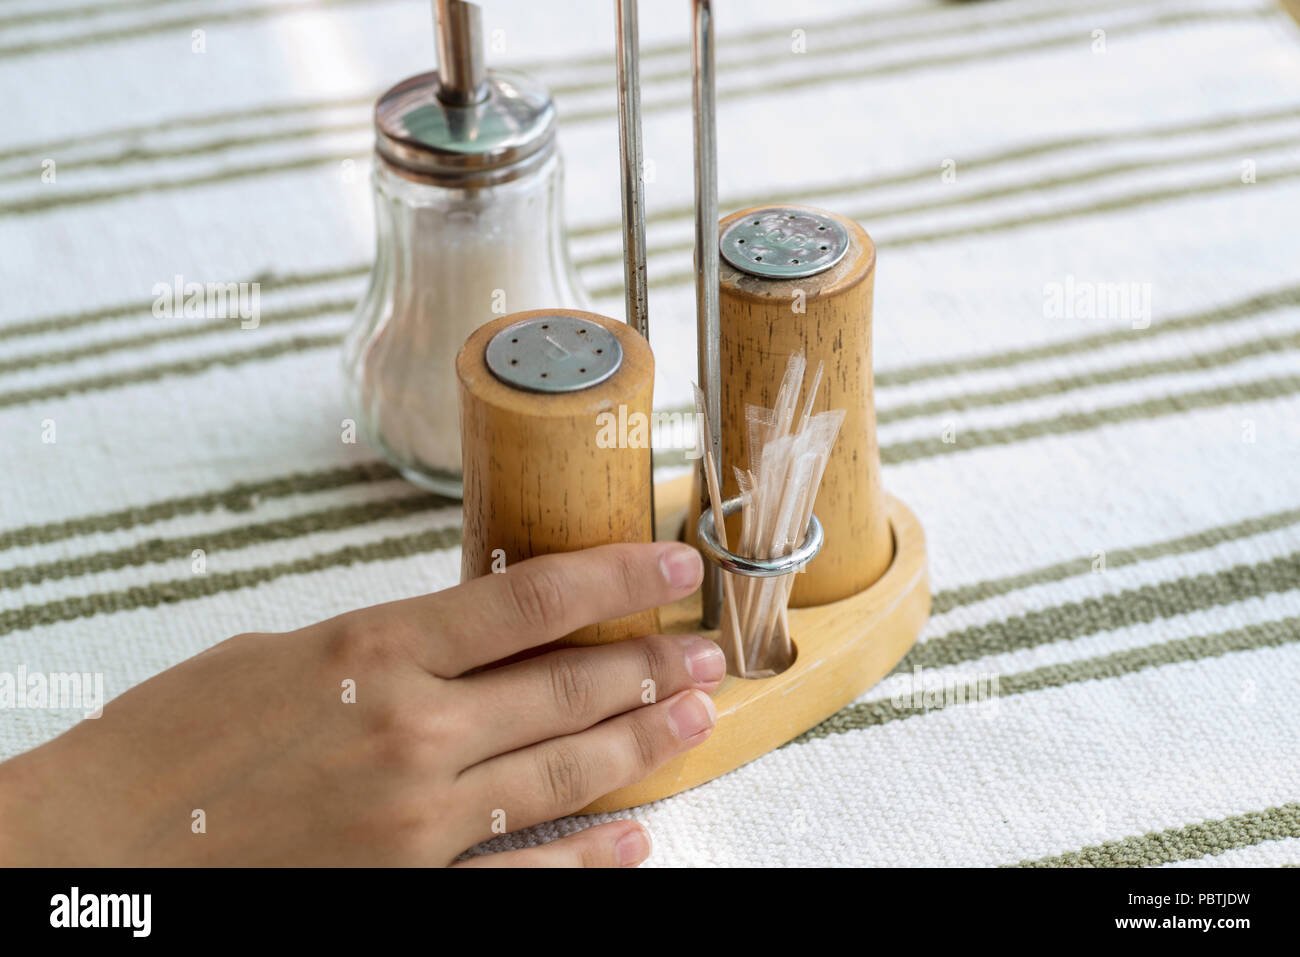 Salt and Pepper shaker on a wooden table Stock Photo